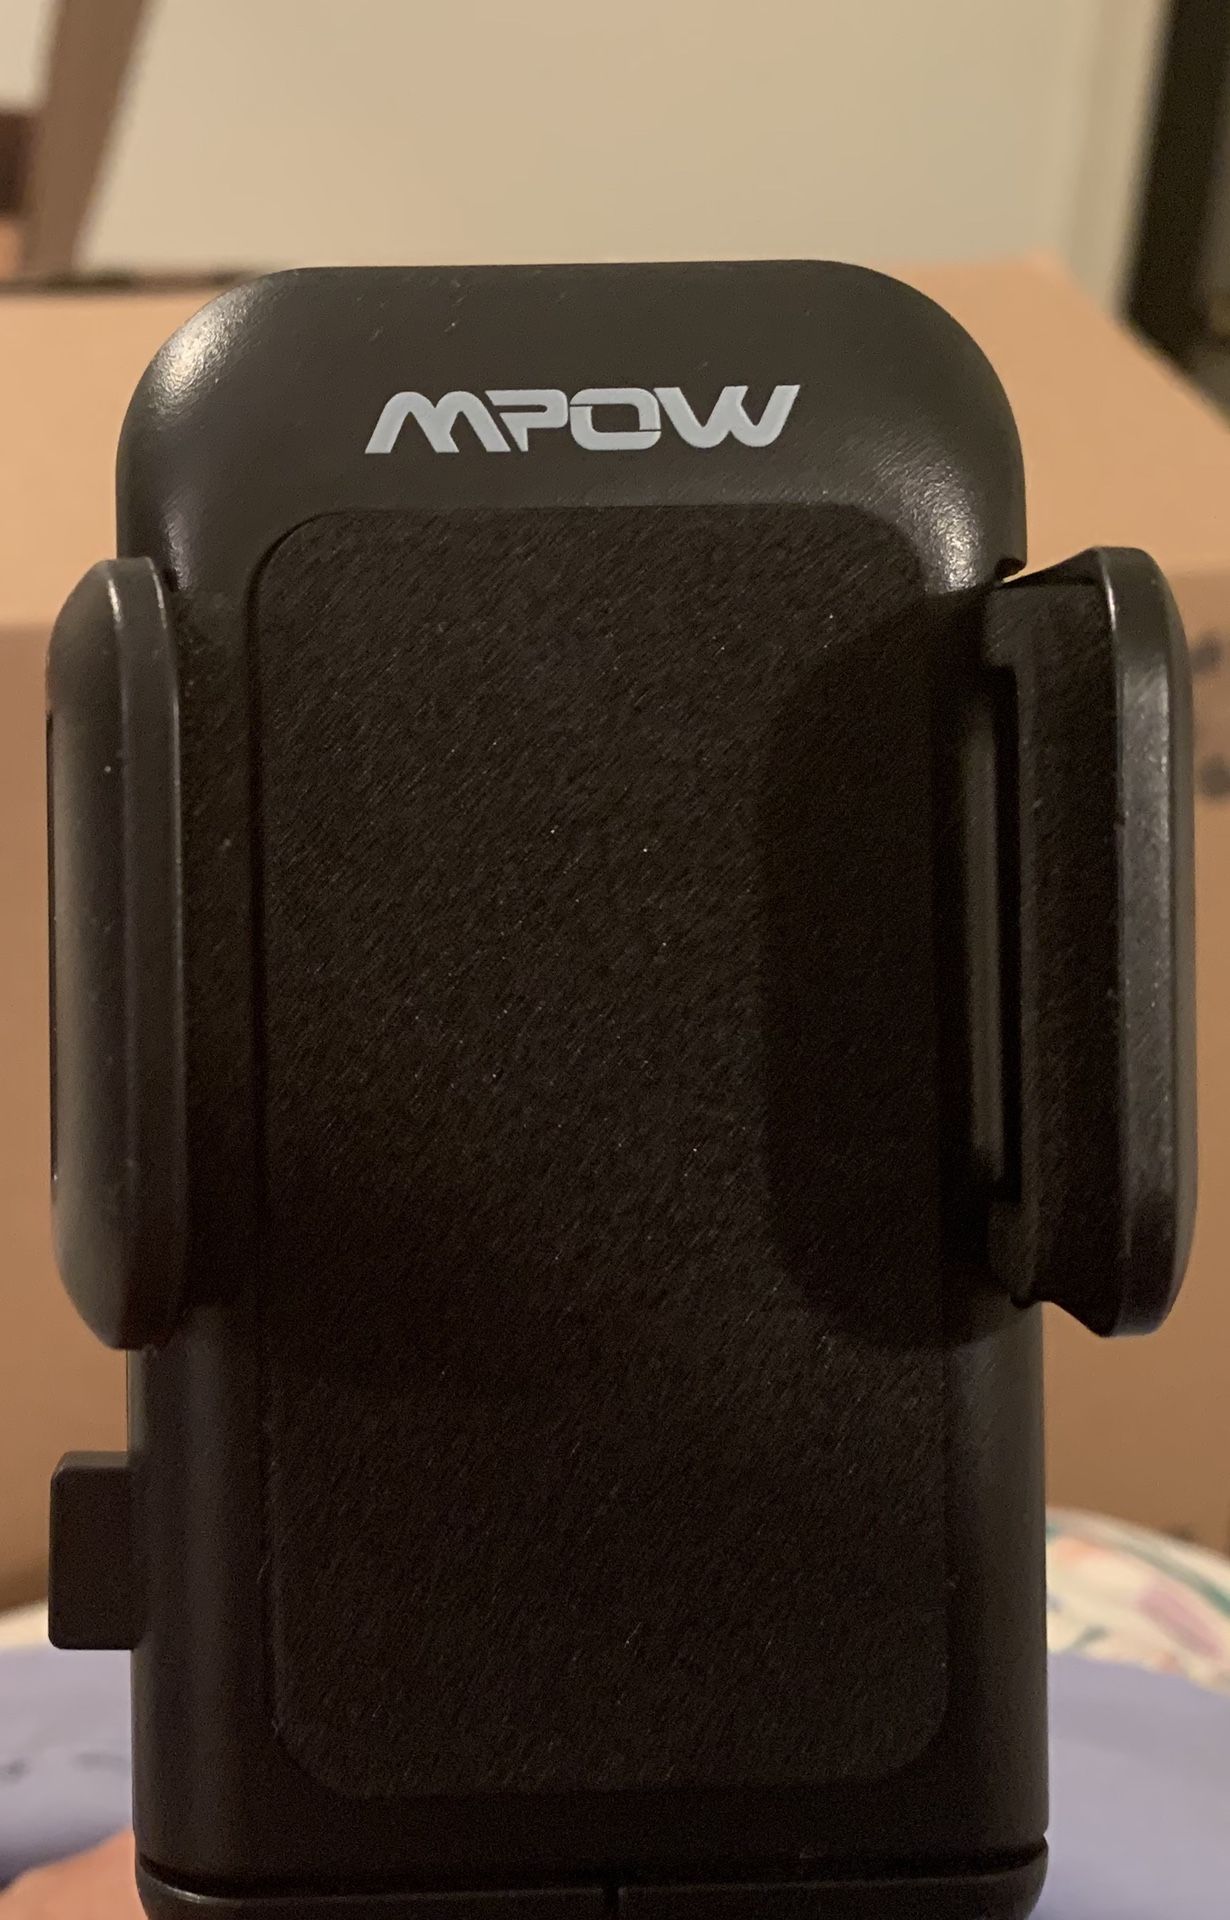 Mpow Cell Phone Mount Car Holder. Double USB Port.